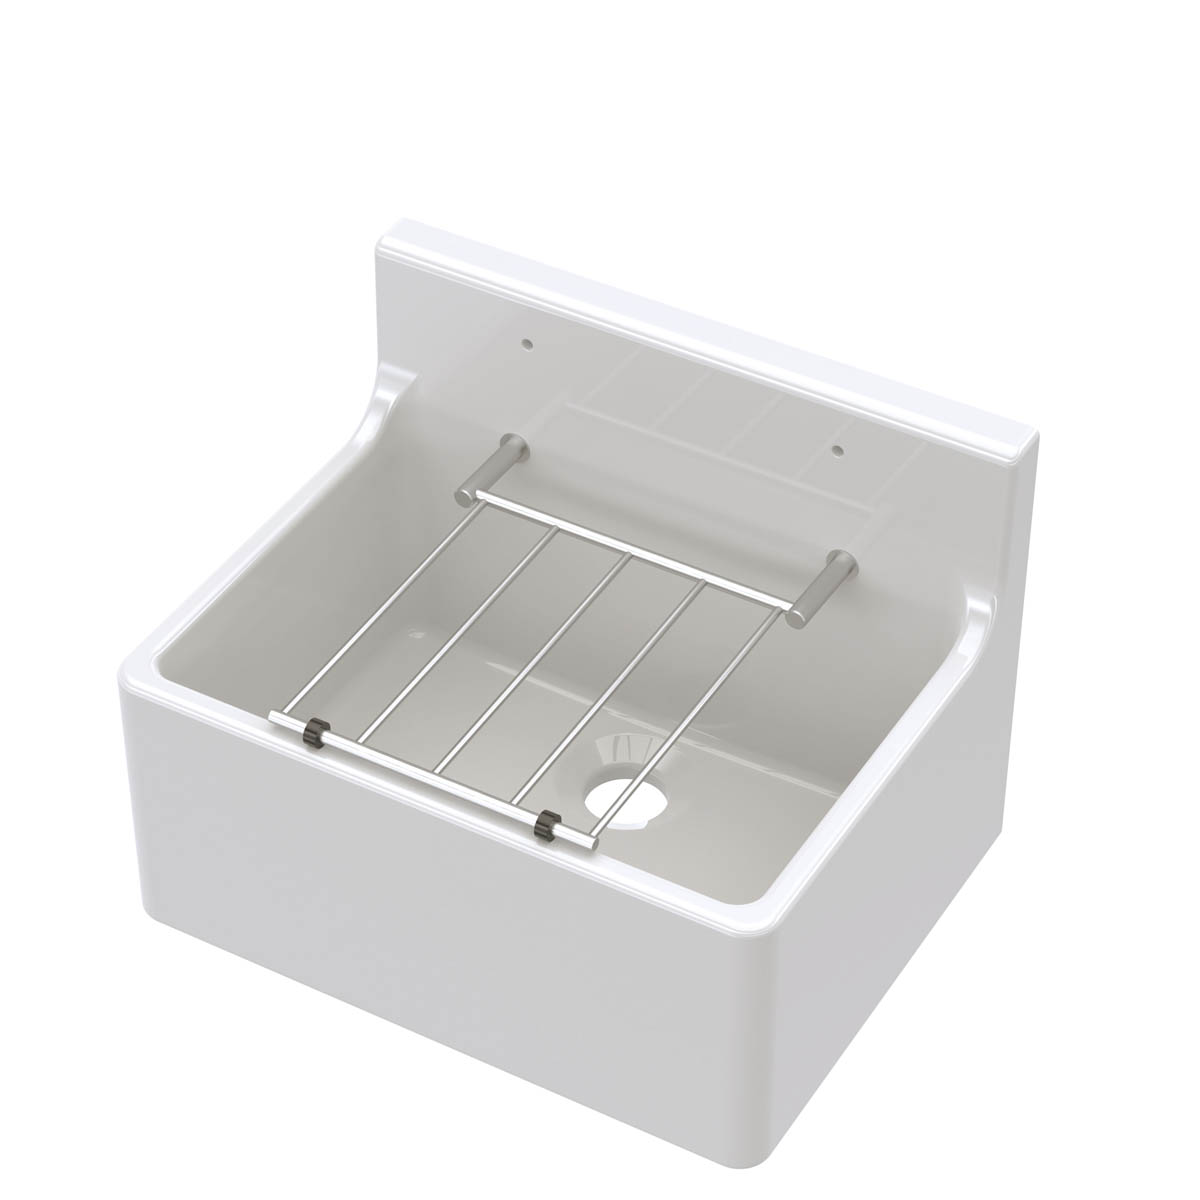 Nuie 515x382x393mm Cleaner Sink - White (20316)